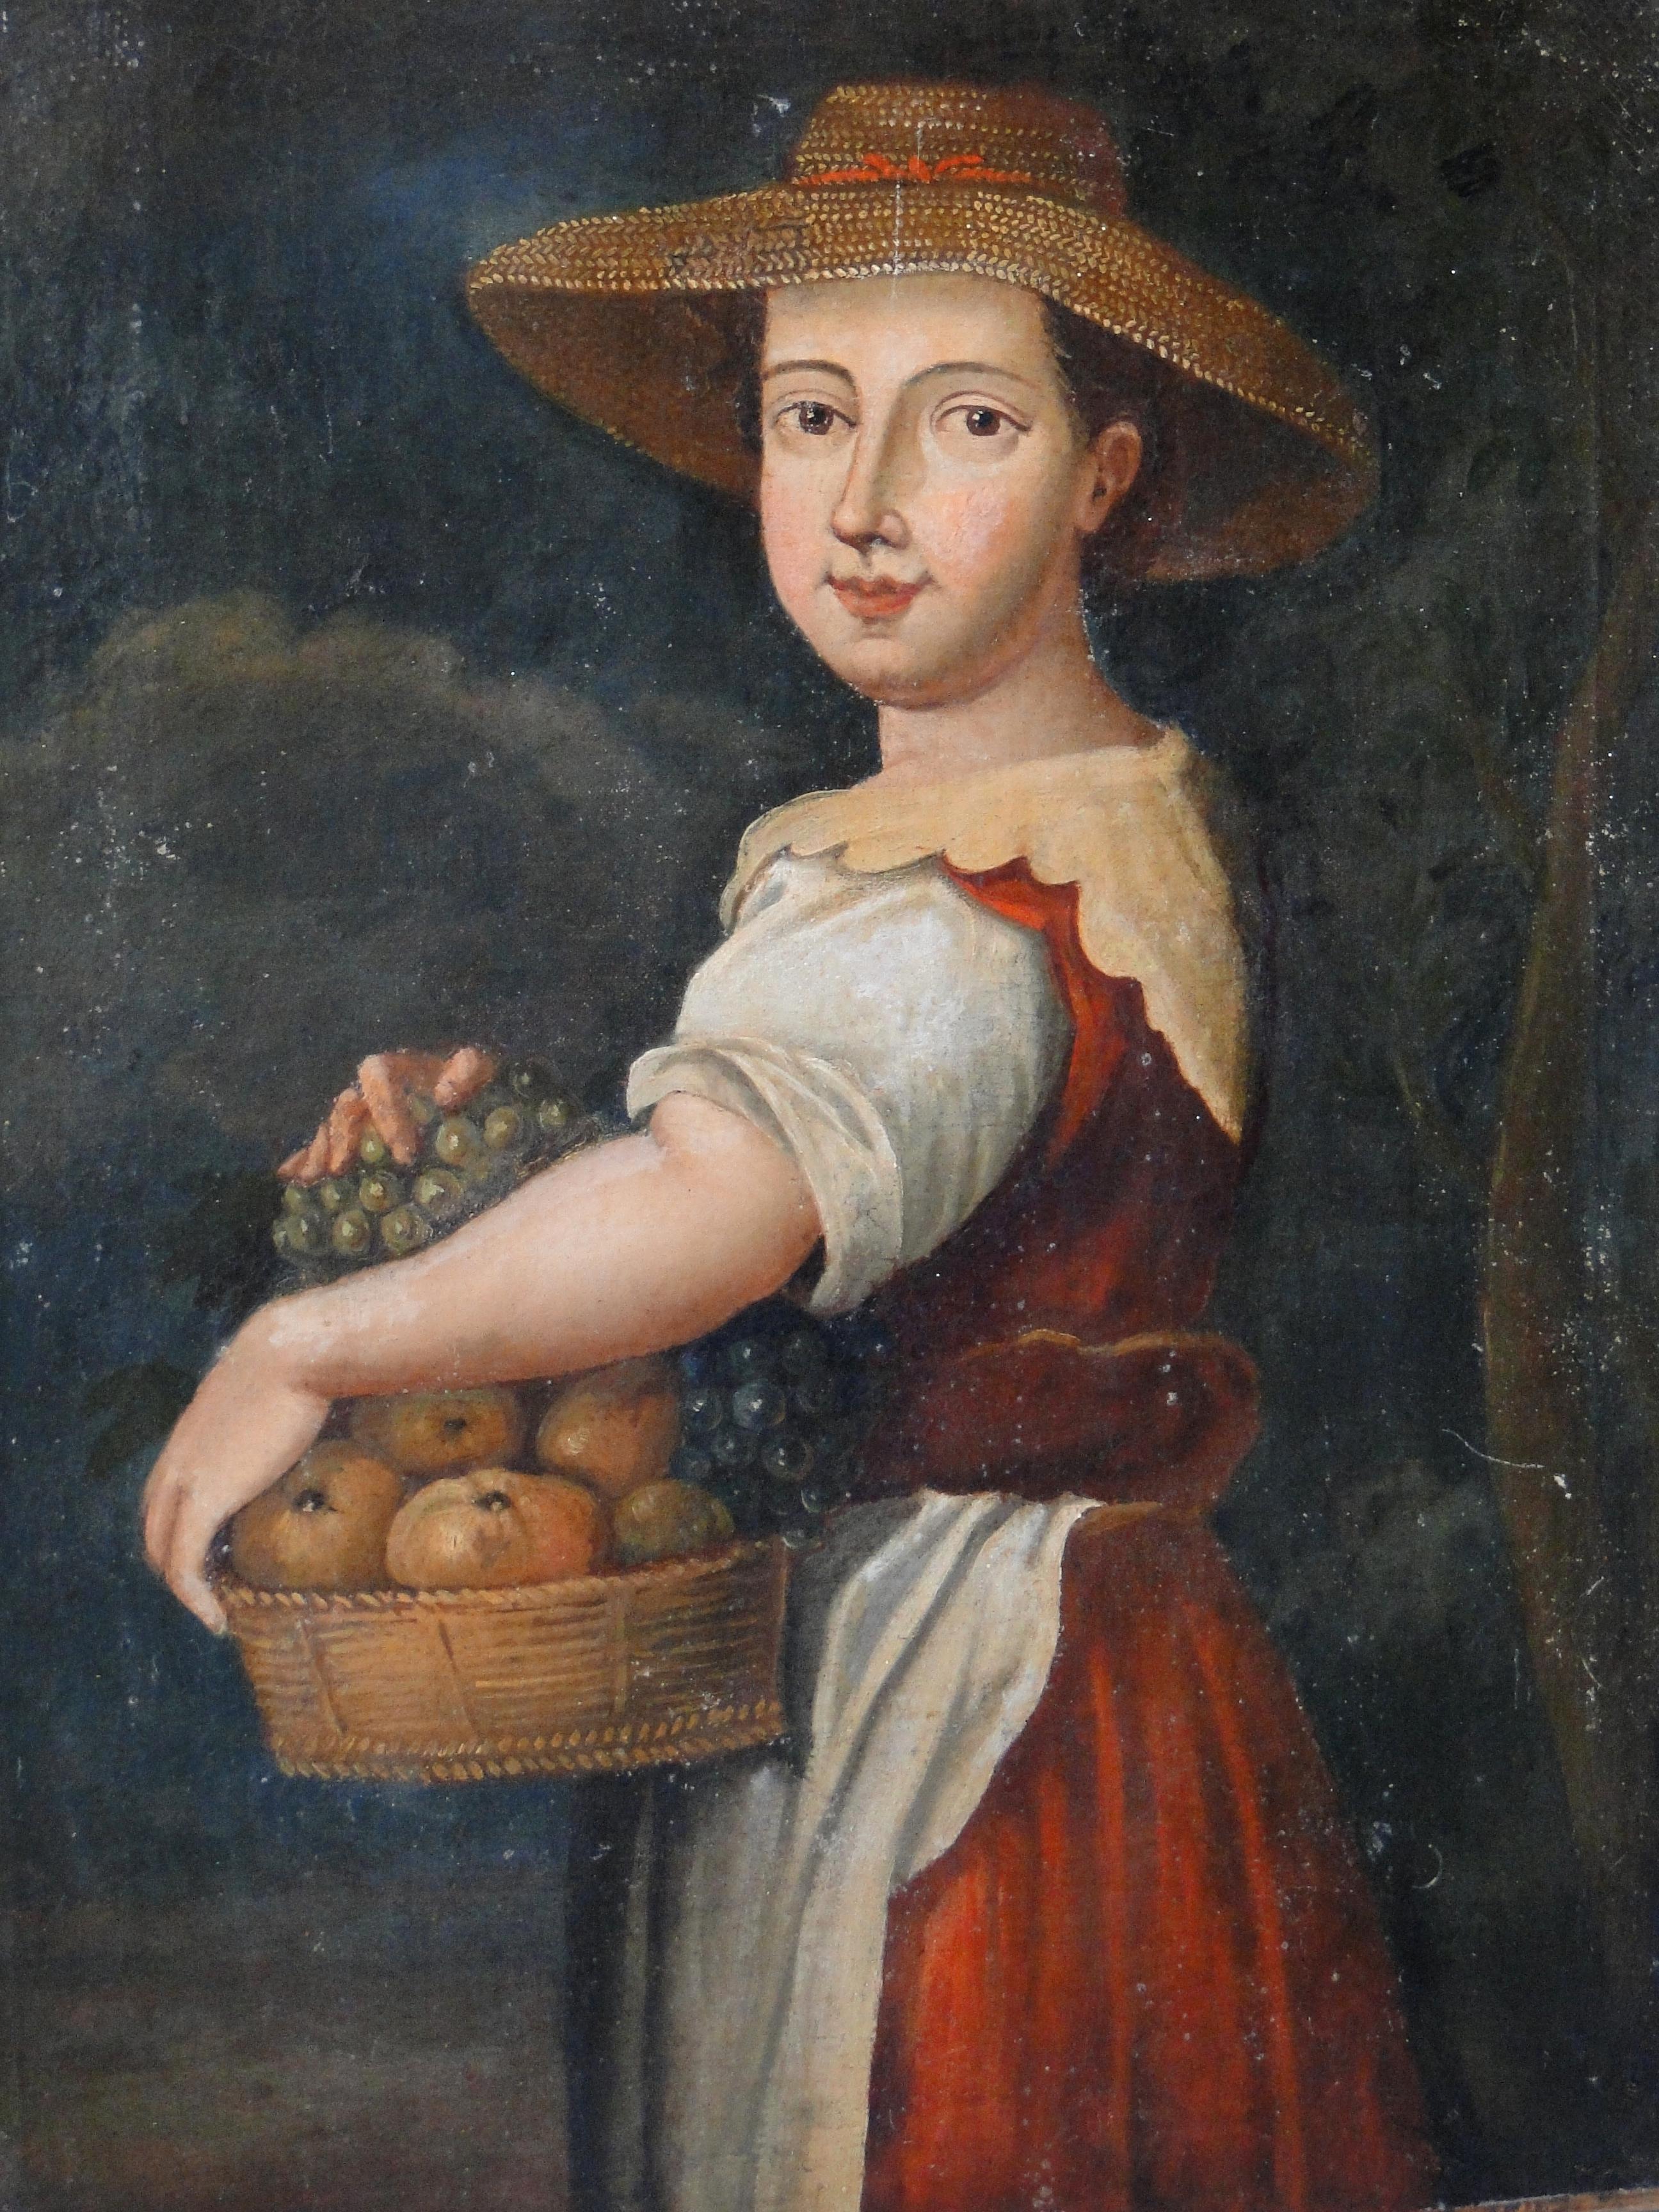 18th century Italian oil painting of a woman with fruitbasket, the painting has been doubled on canvas and stretched on a stretcher frame.